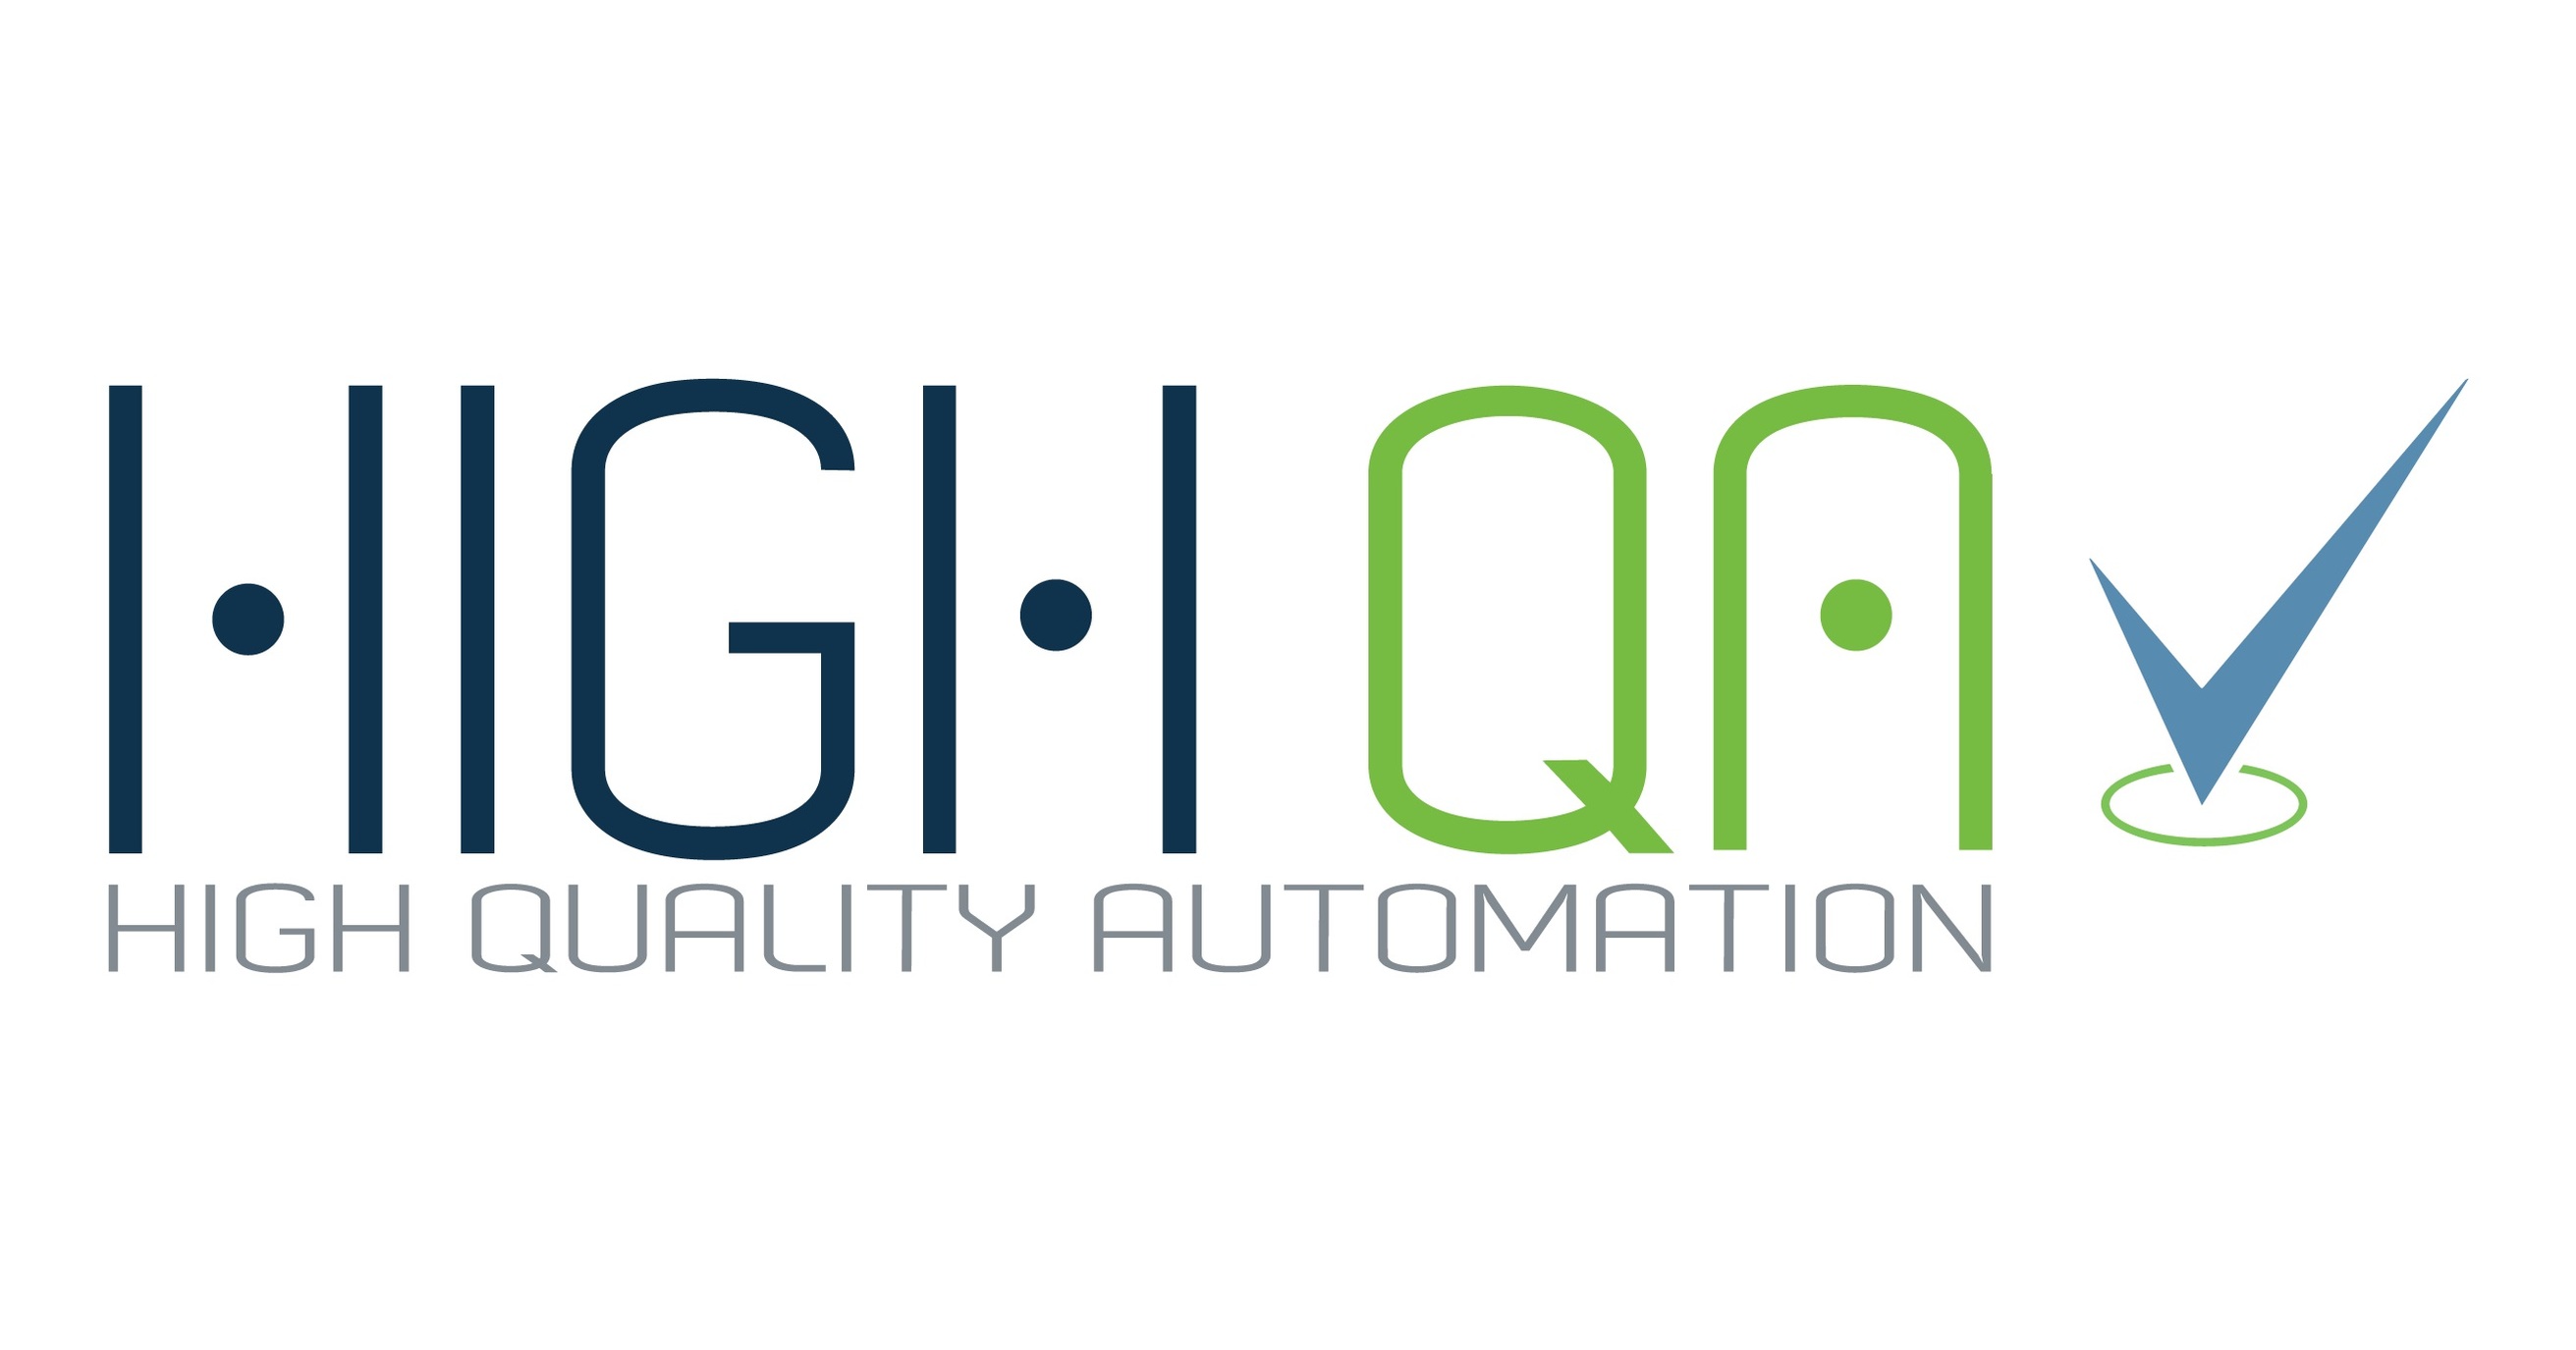 High QA Version 7.0 Software Delivers Unprecedented Manufacturing Production Quality Planning Capabilities (PPAP/APQP/FAI/Supply Chain)